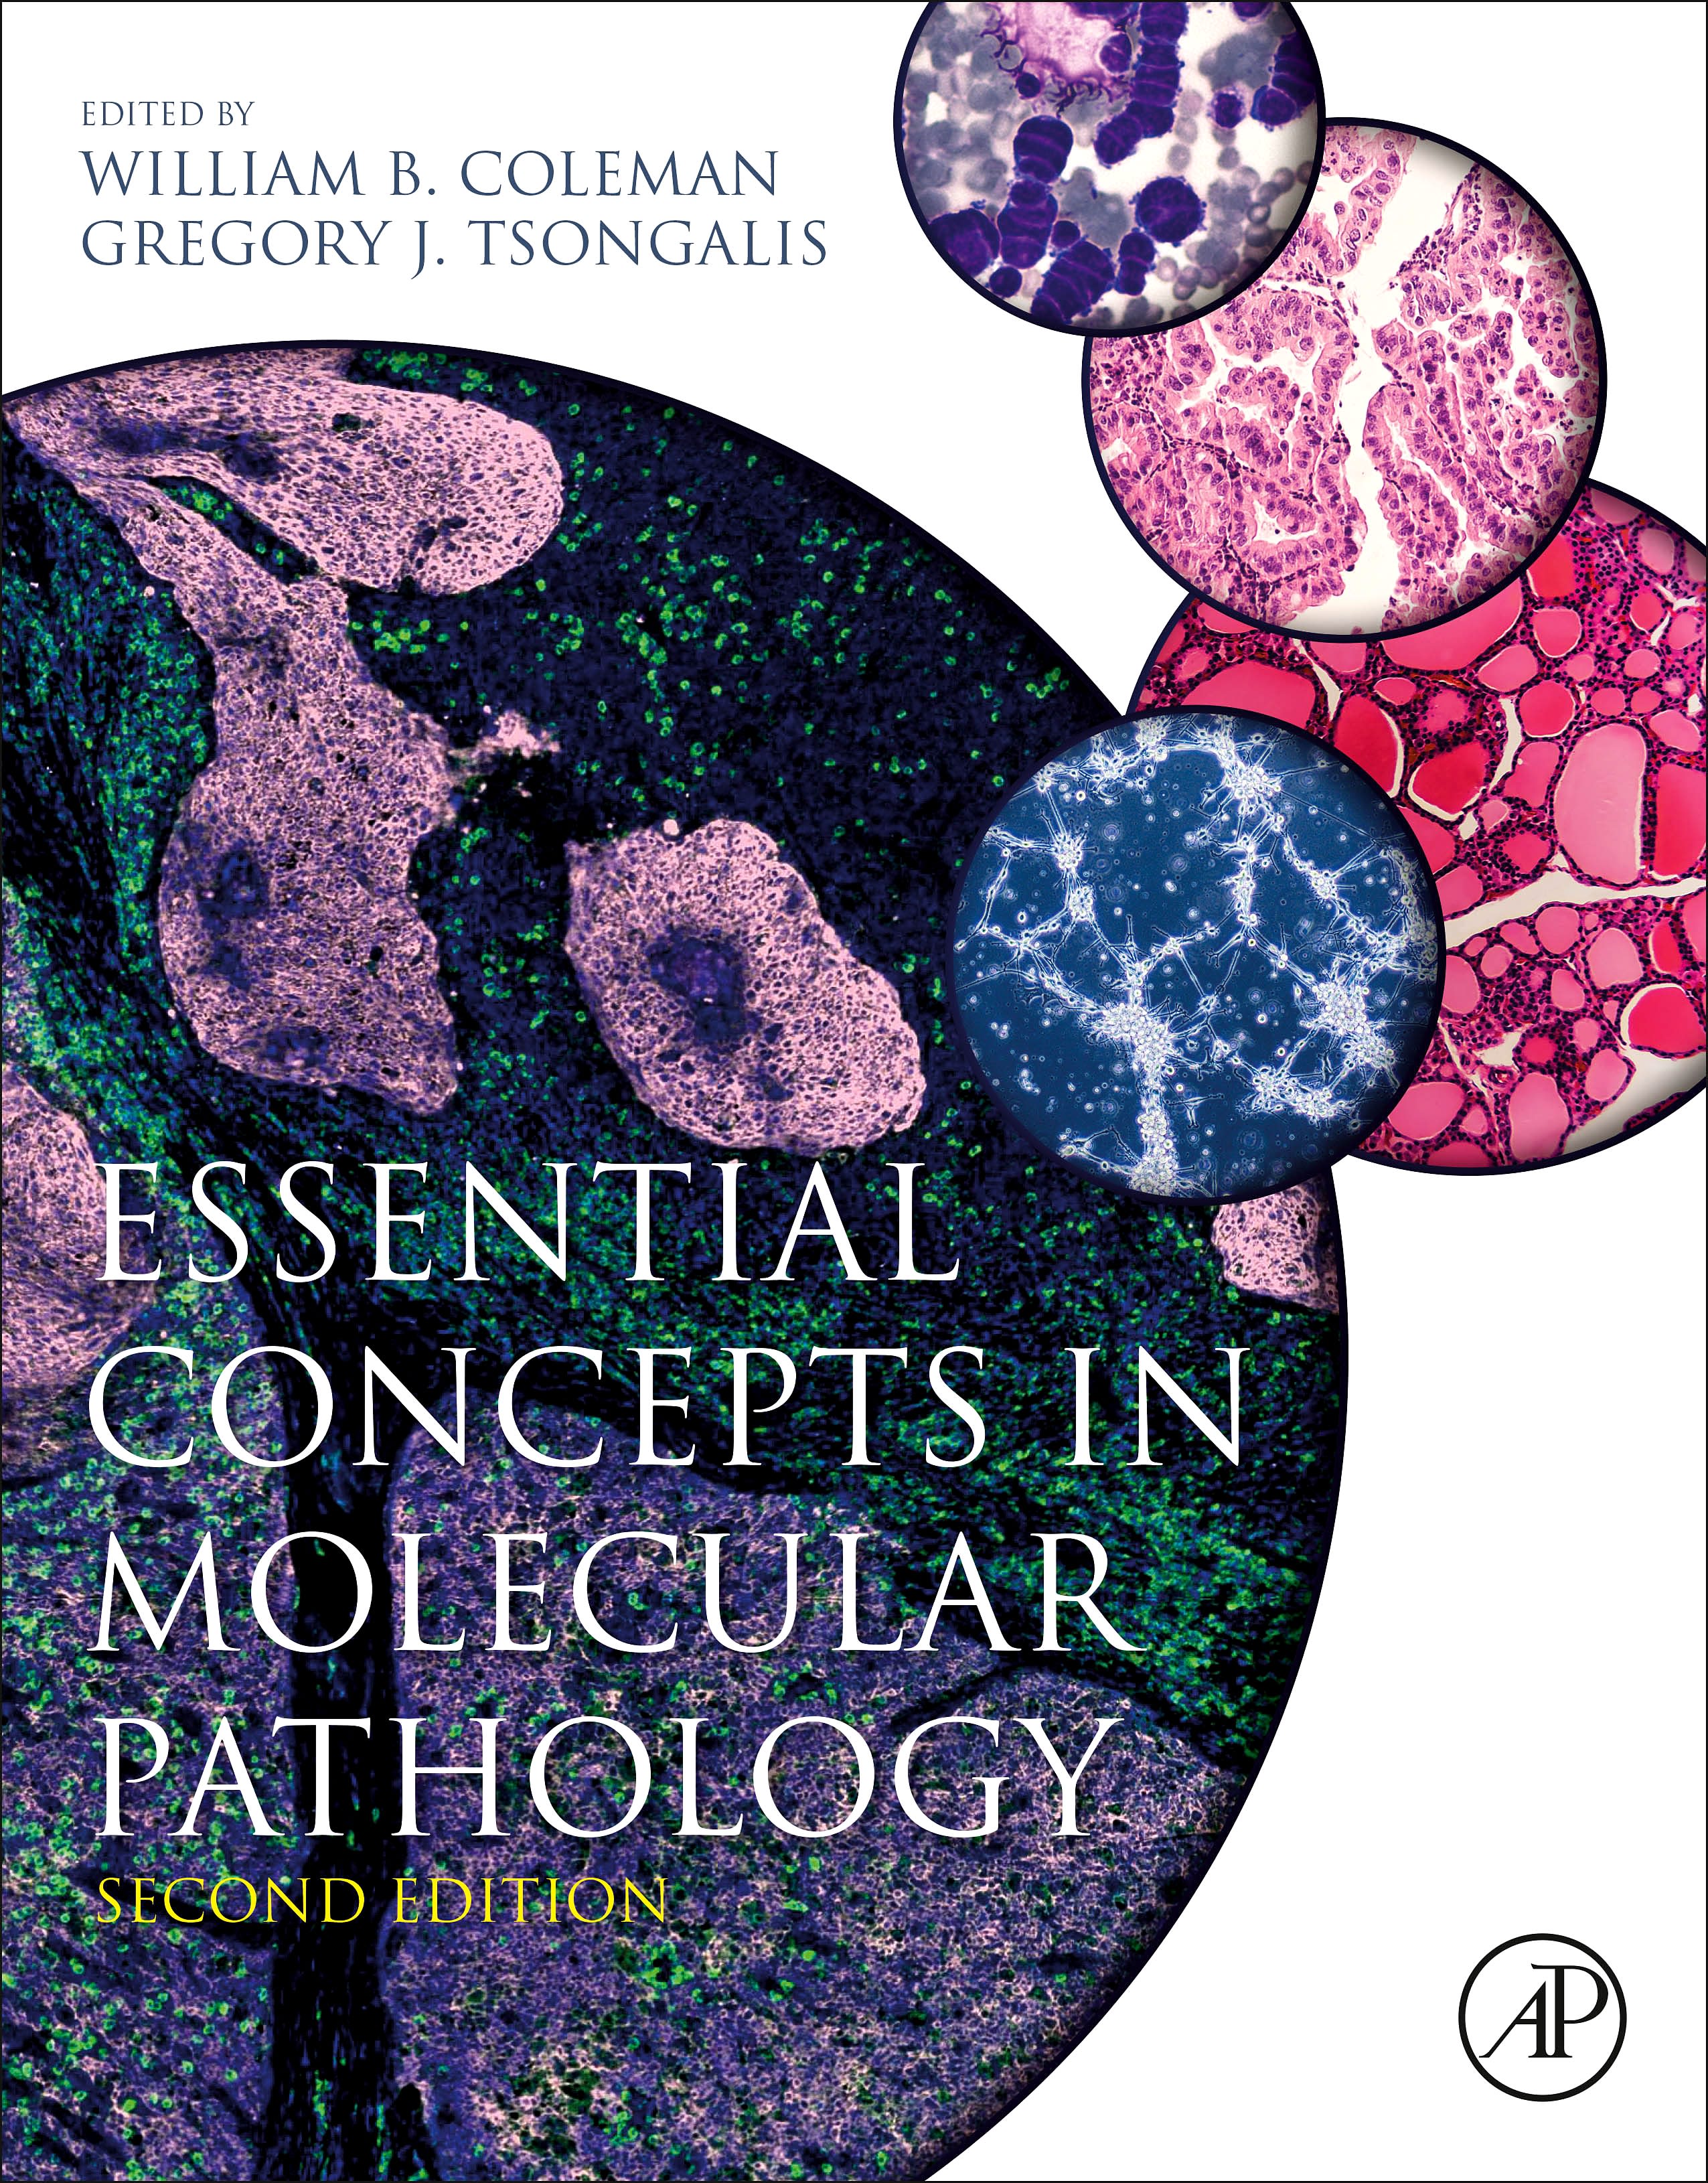 essential concepts in molecular pathology 2nd edition william b coleman, gregory j tsongalis 0128132574,